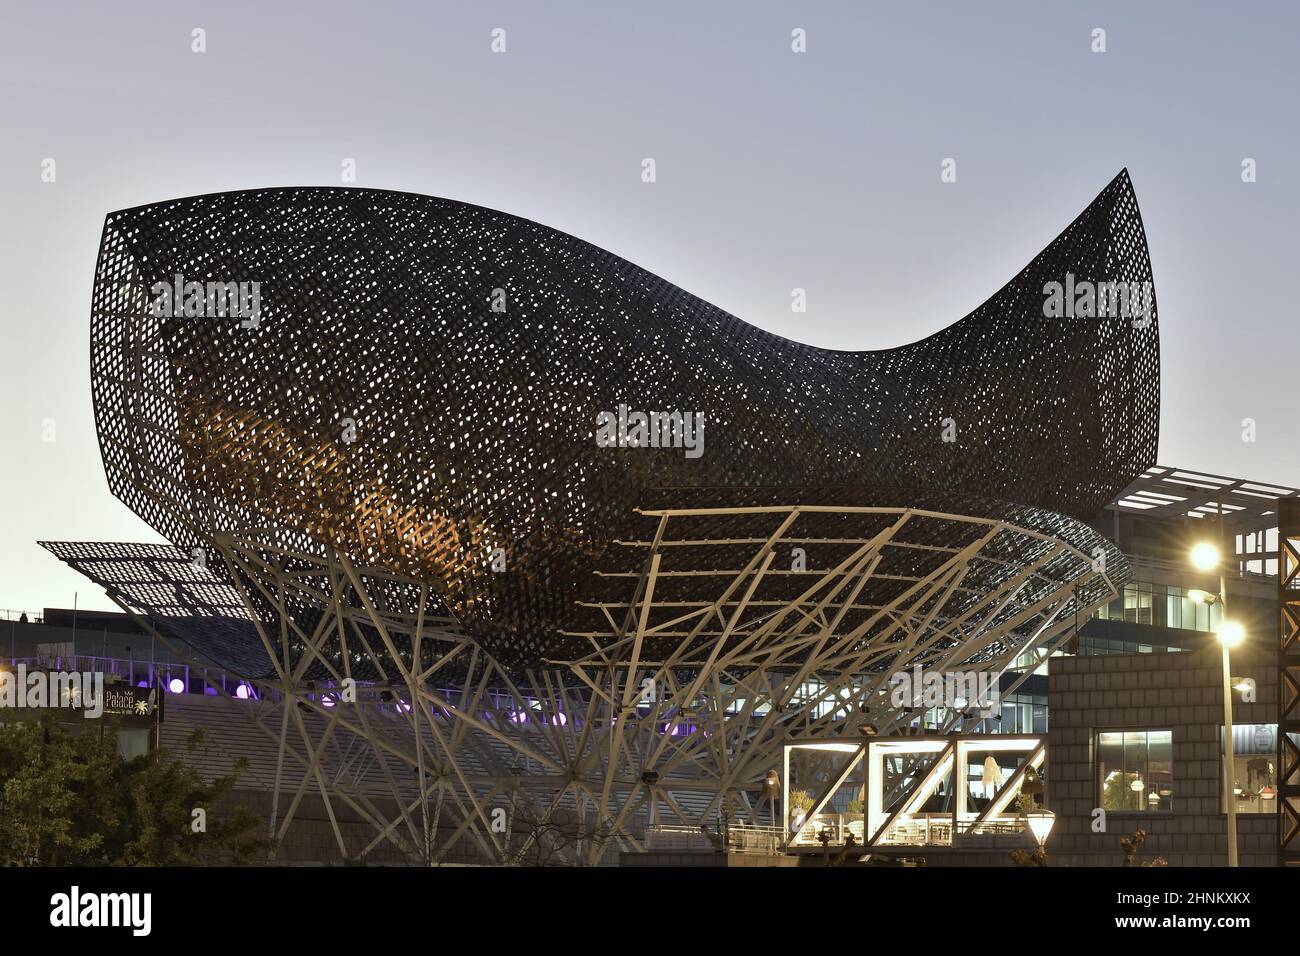 Peix (Golden Fish) modern steel sculpture at dusk, designed by Frank Gehry  architect, located in Port Olimpic of Barcelona Spain Stock Photo - Alamy